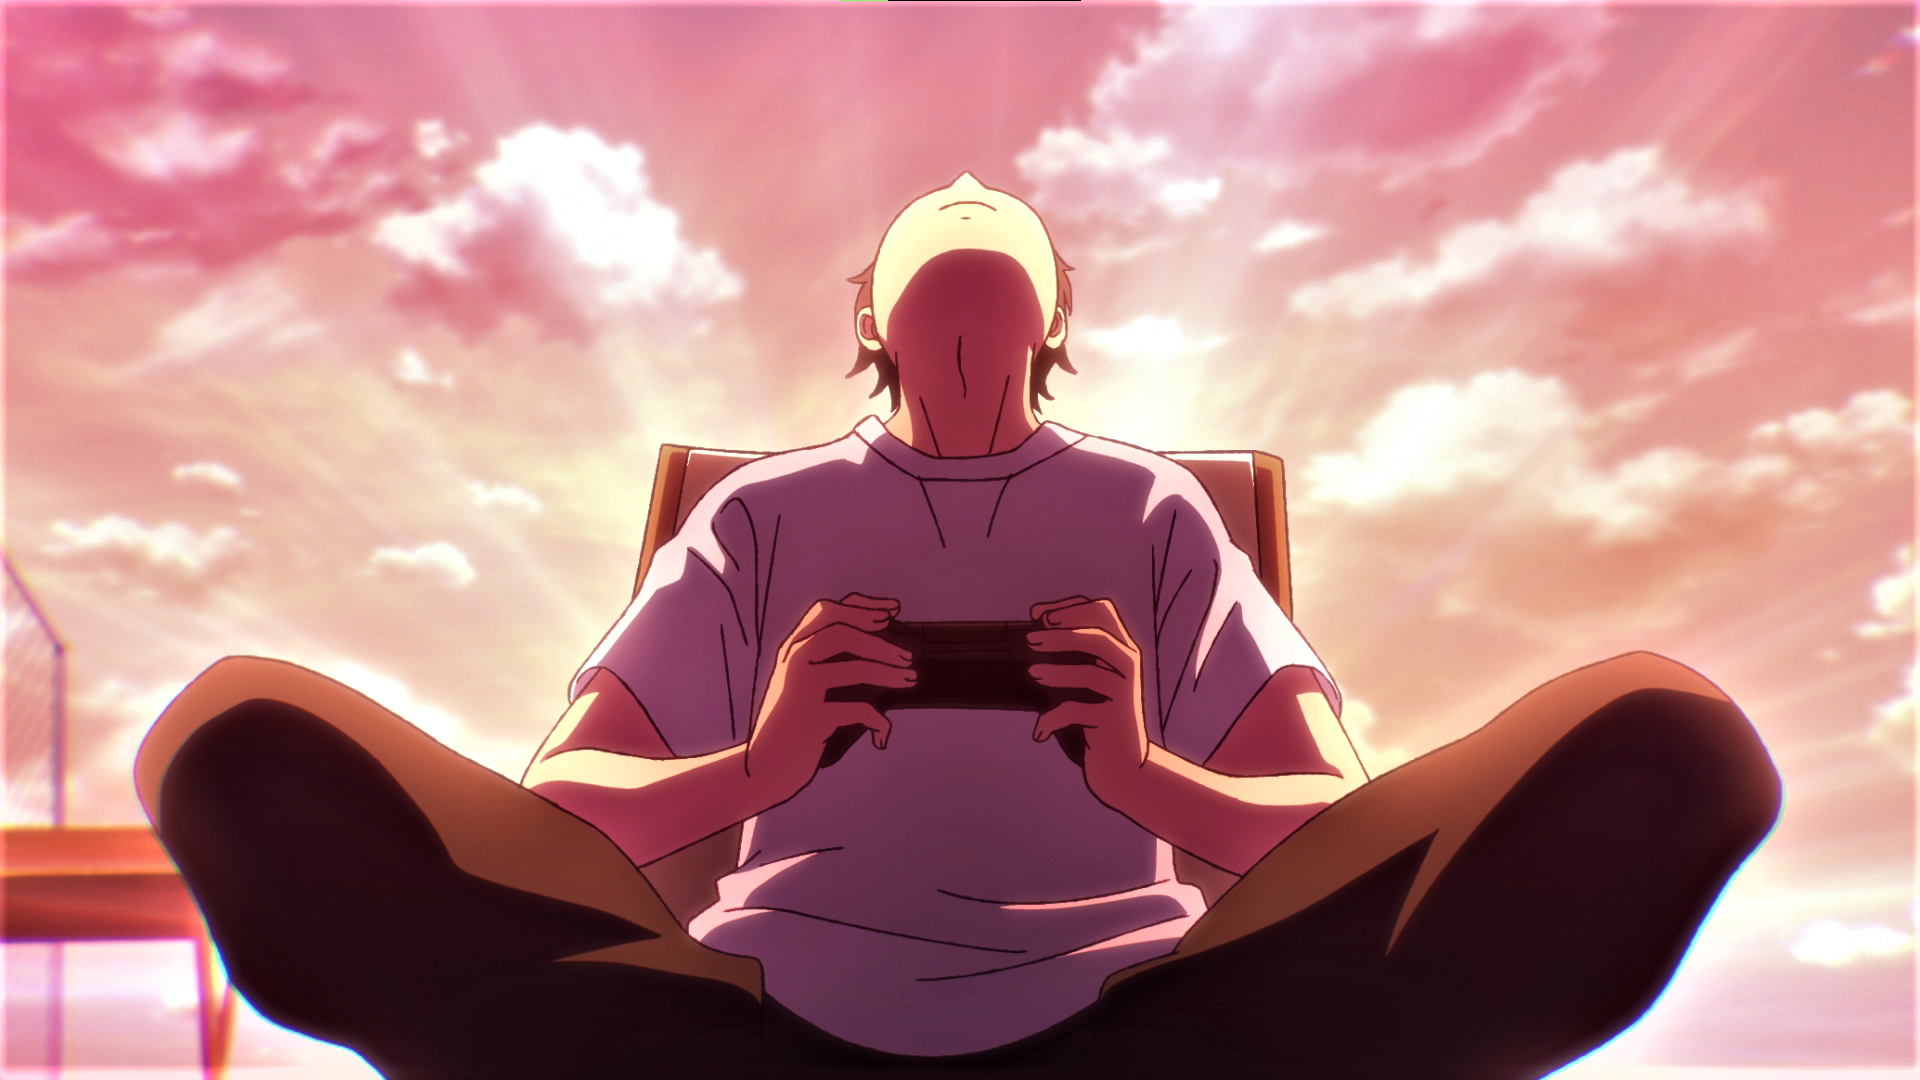 Zom 100 Bucket List Of The Dead Controllers Sky Clouds Sunset Sunset Glow Akira Tendou Anime Anime S 1920x1080